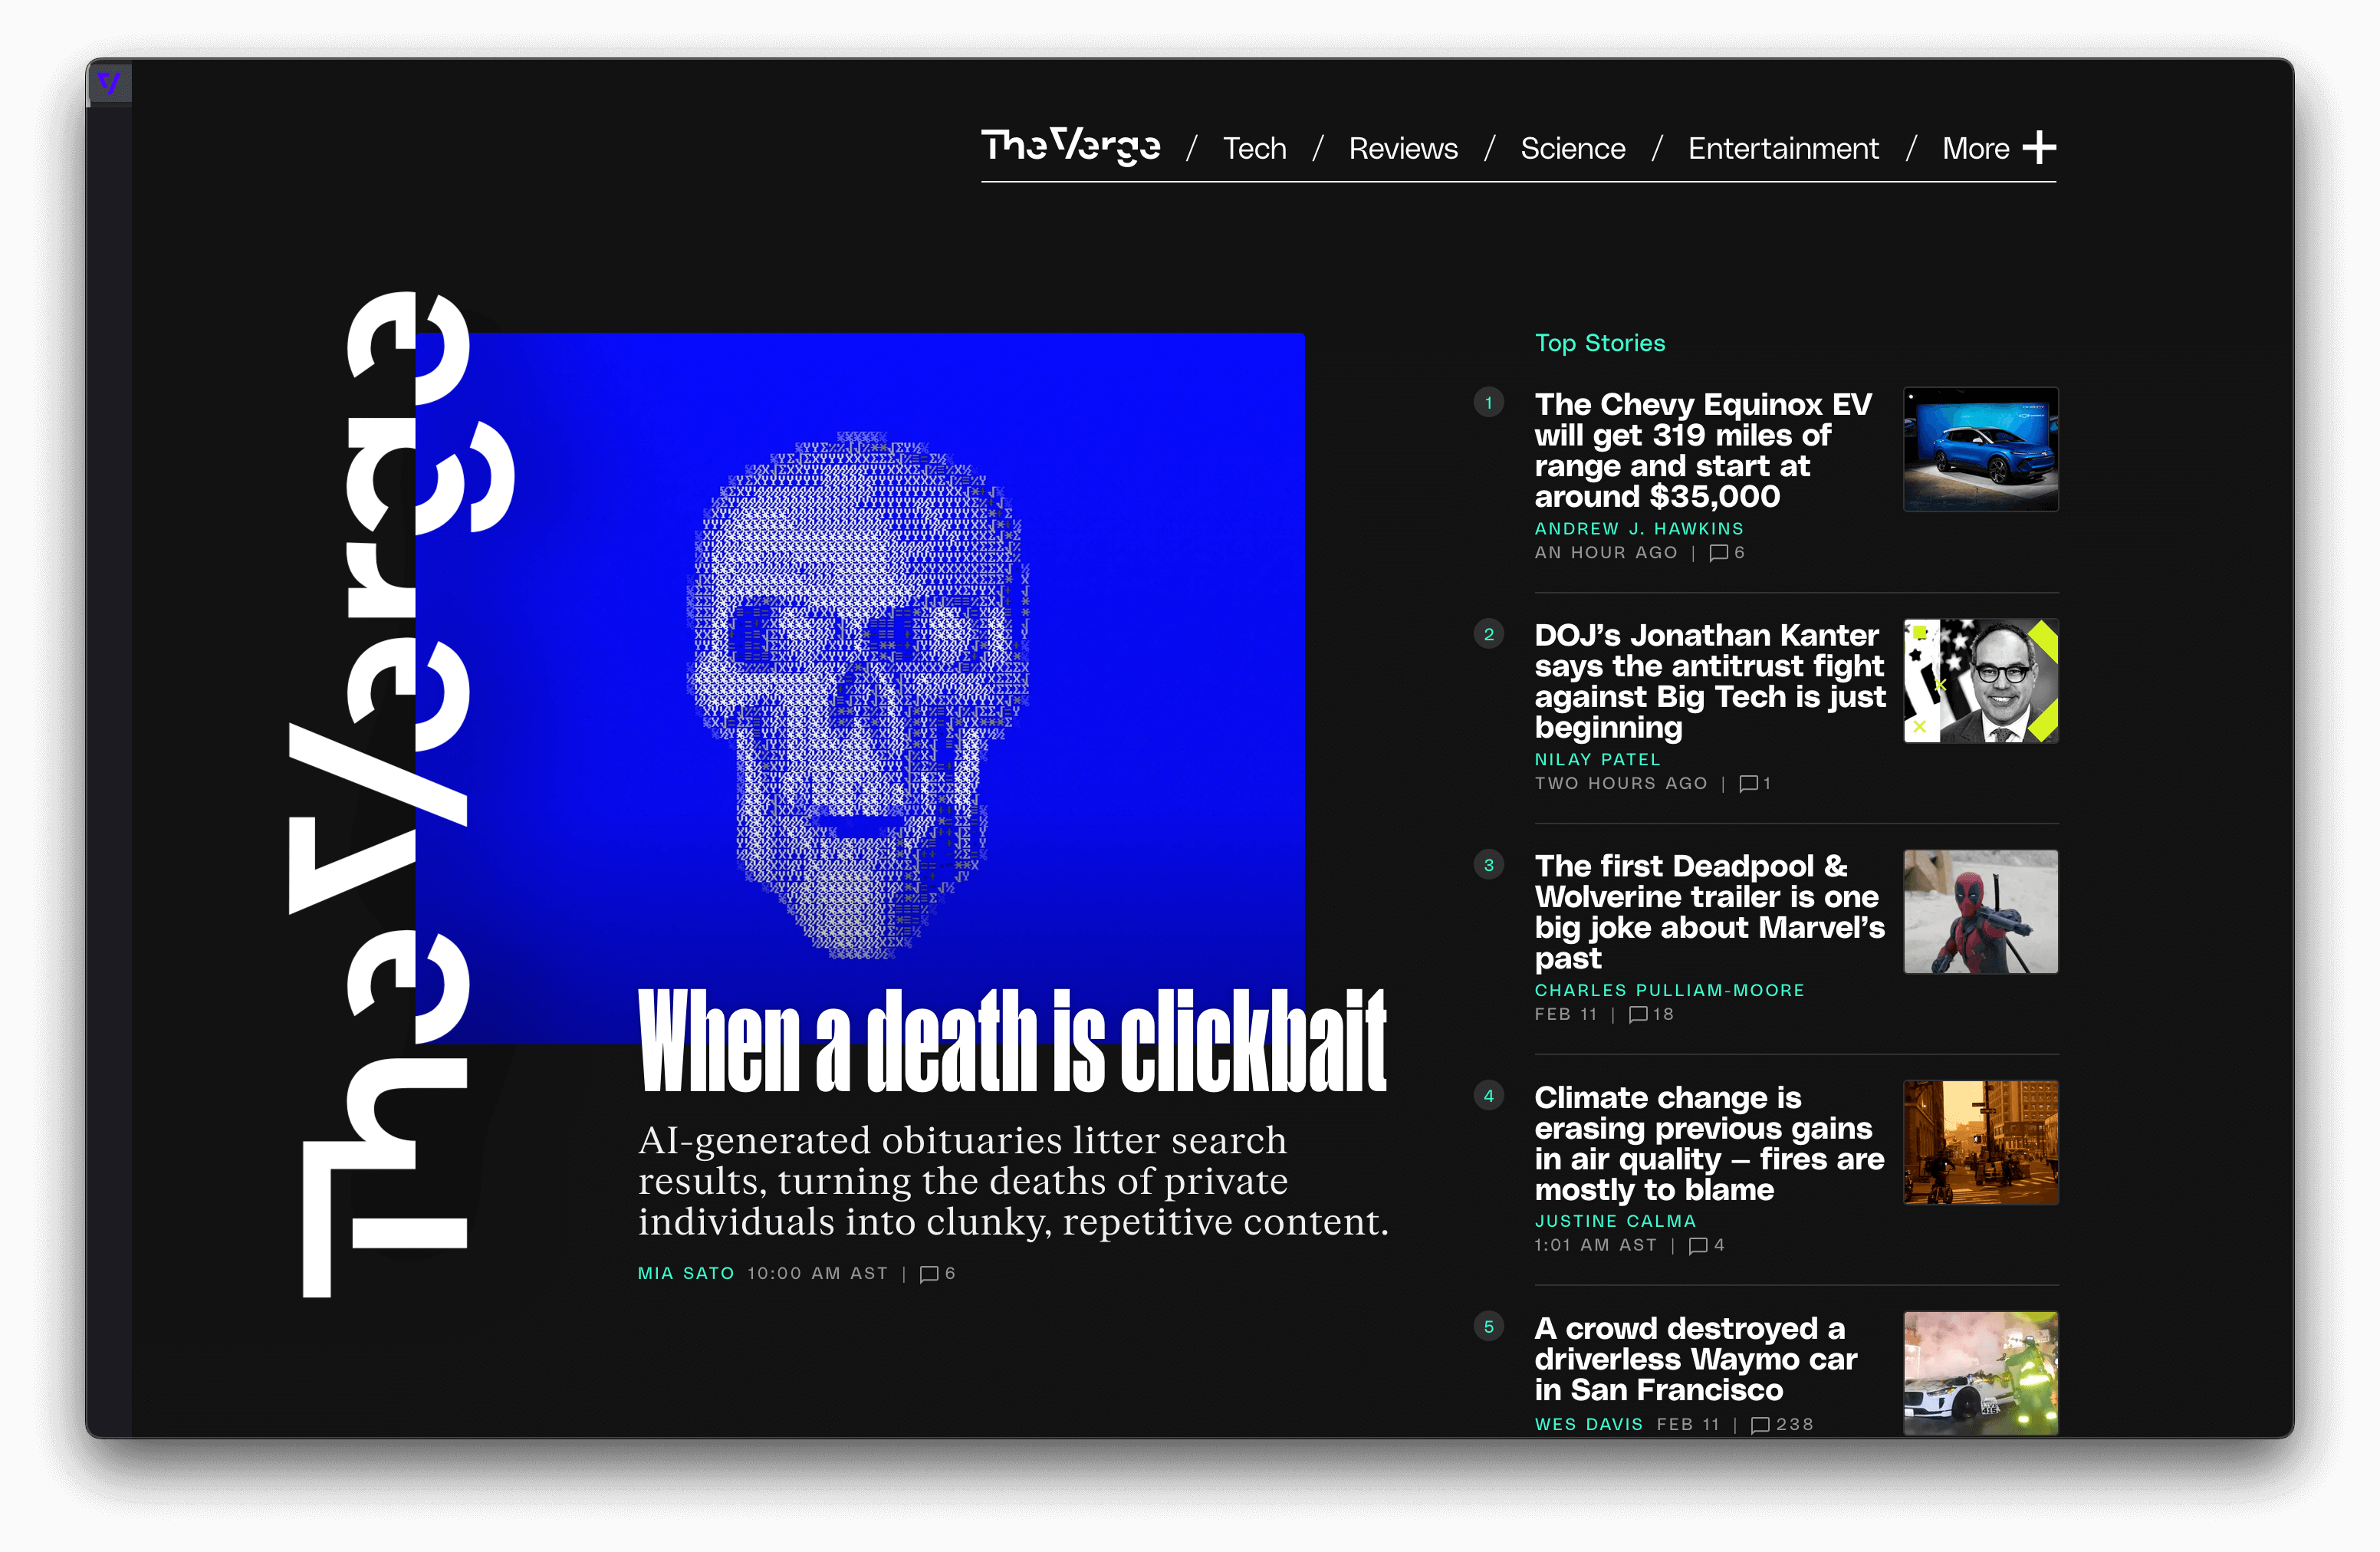 A Firefox browser with verital tabs, showing The Verge homepage.